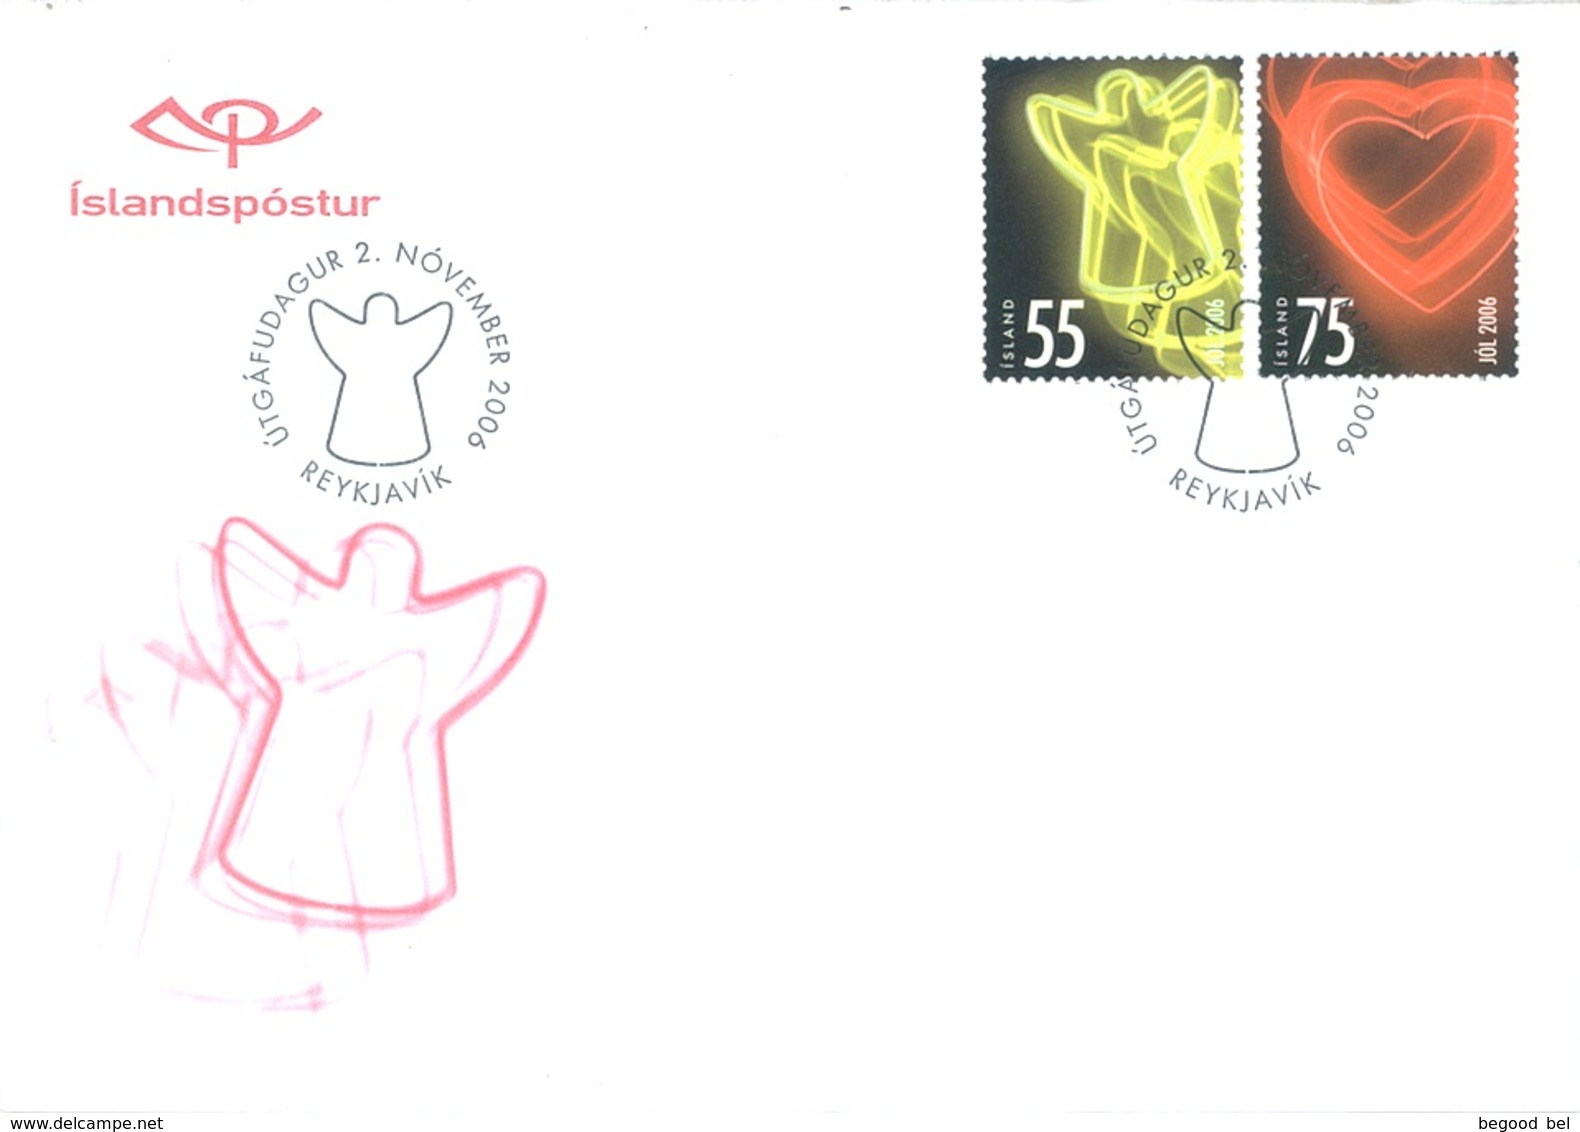 ISLAND  - FDC - YEAR 2006 COMPLETE SET 17 FDC's - Lot 17766 - QUOTATION  MICHEL 94.00 EUR